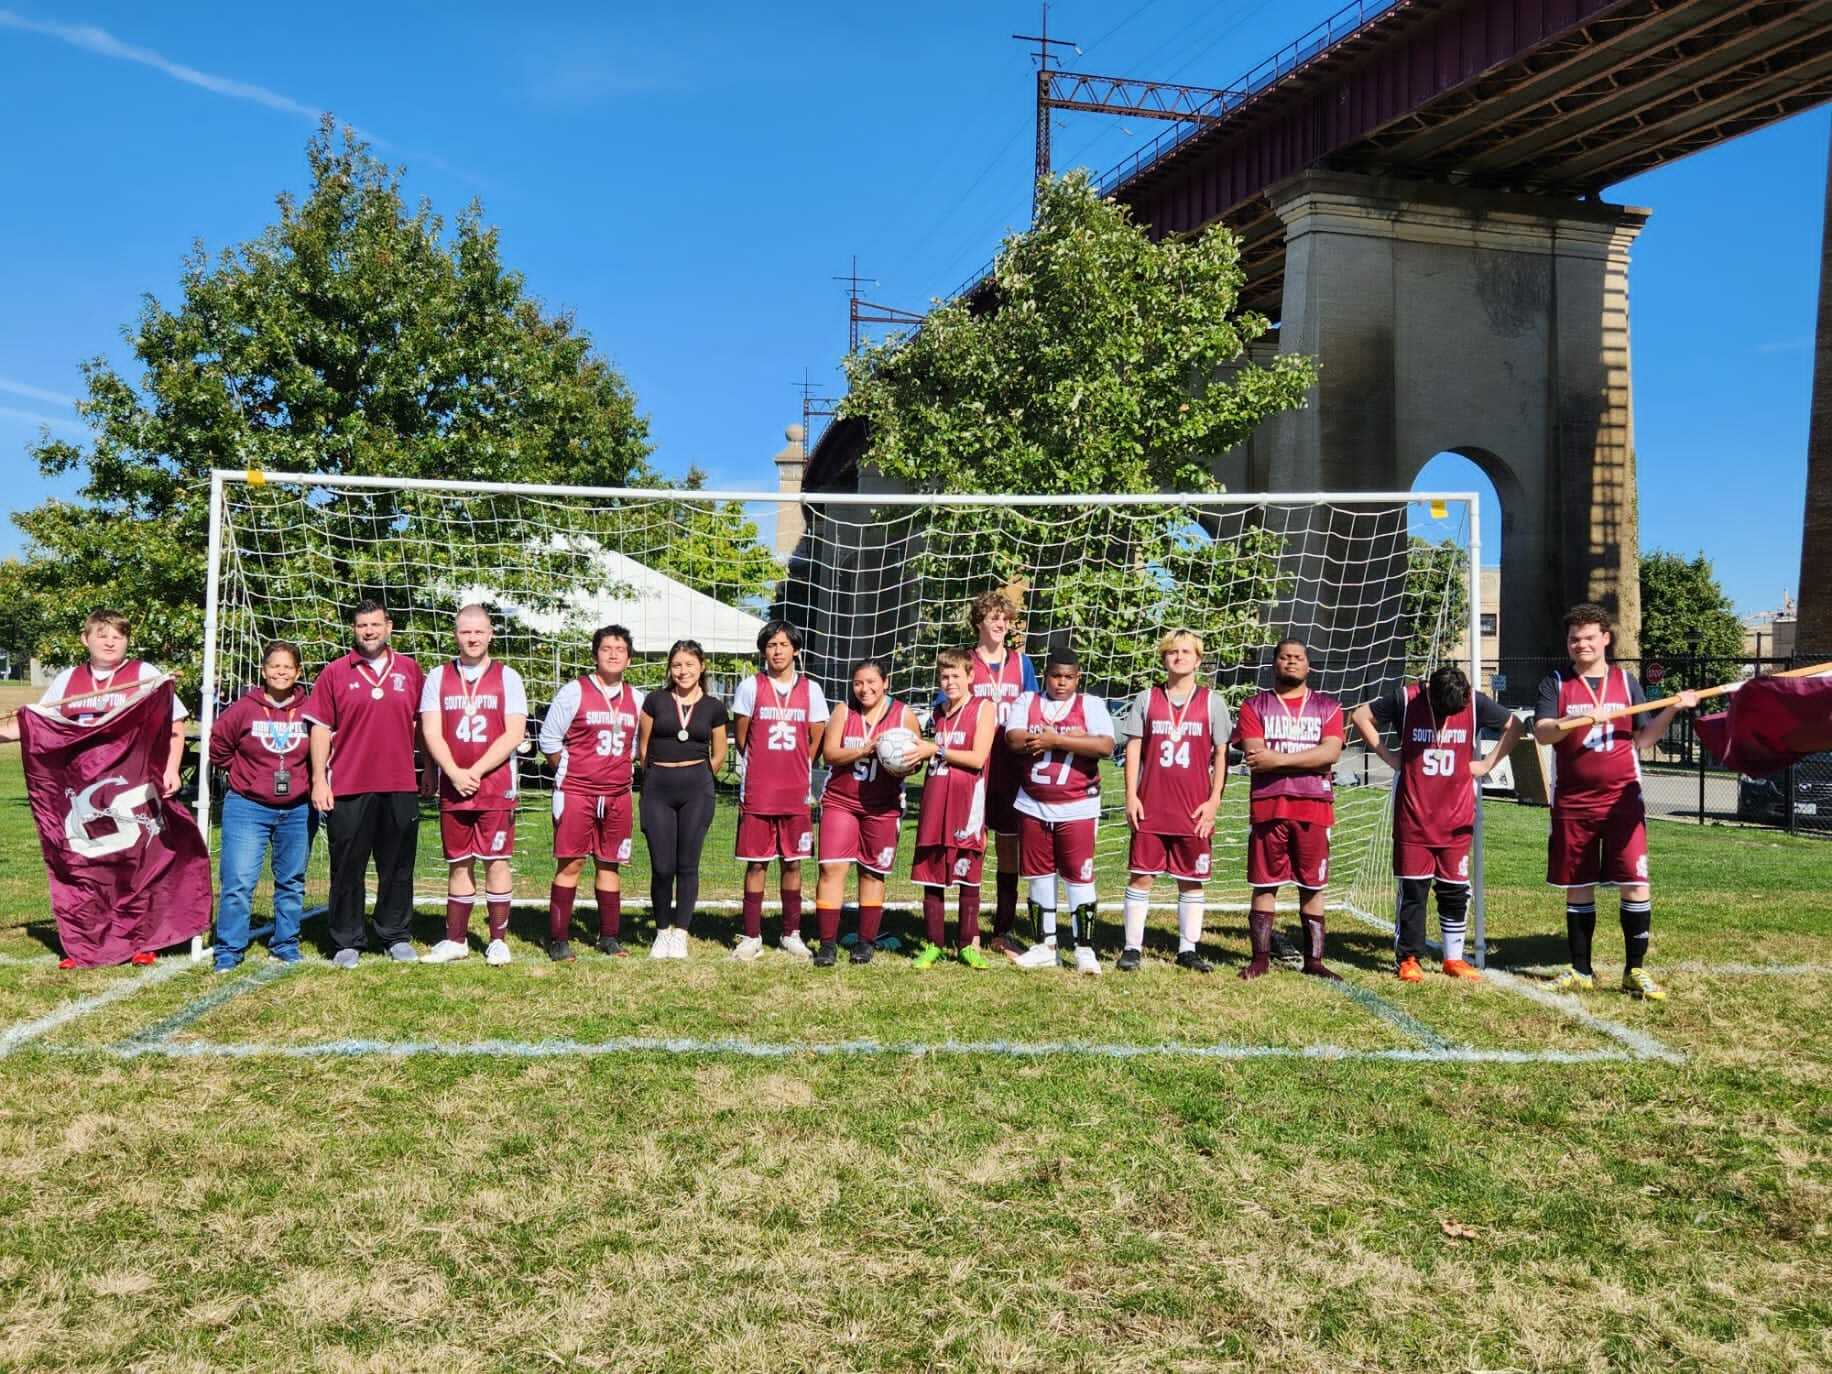 Southampton High School’s unified soccer team recently competed in the Long Island Fall Classic for Special Olympics. COURTESY SOUTHAMPTON SCHOOL DISTRICT